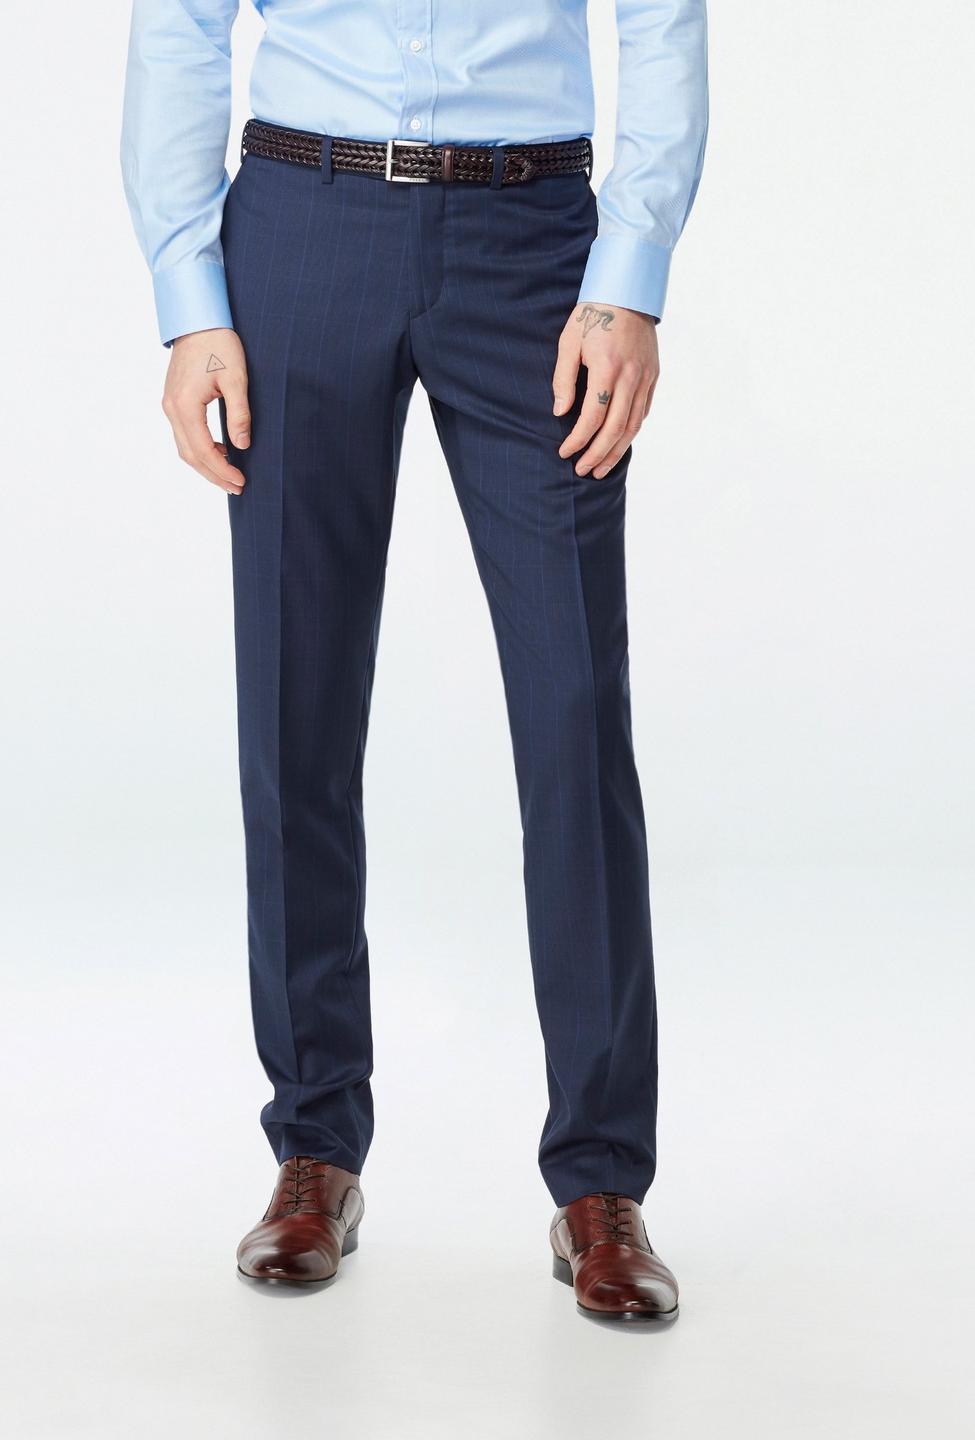 Blue pants - Hemsworth Plaid Design from Premium Indochino Collection